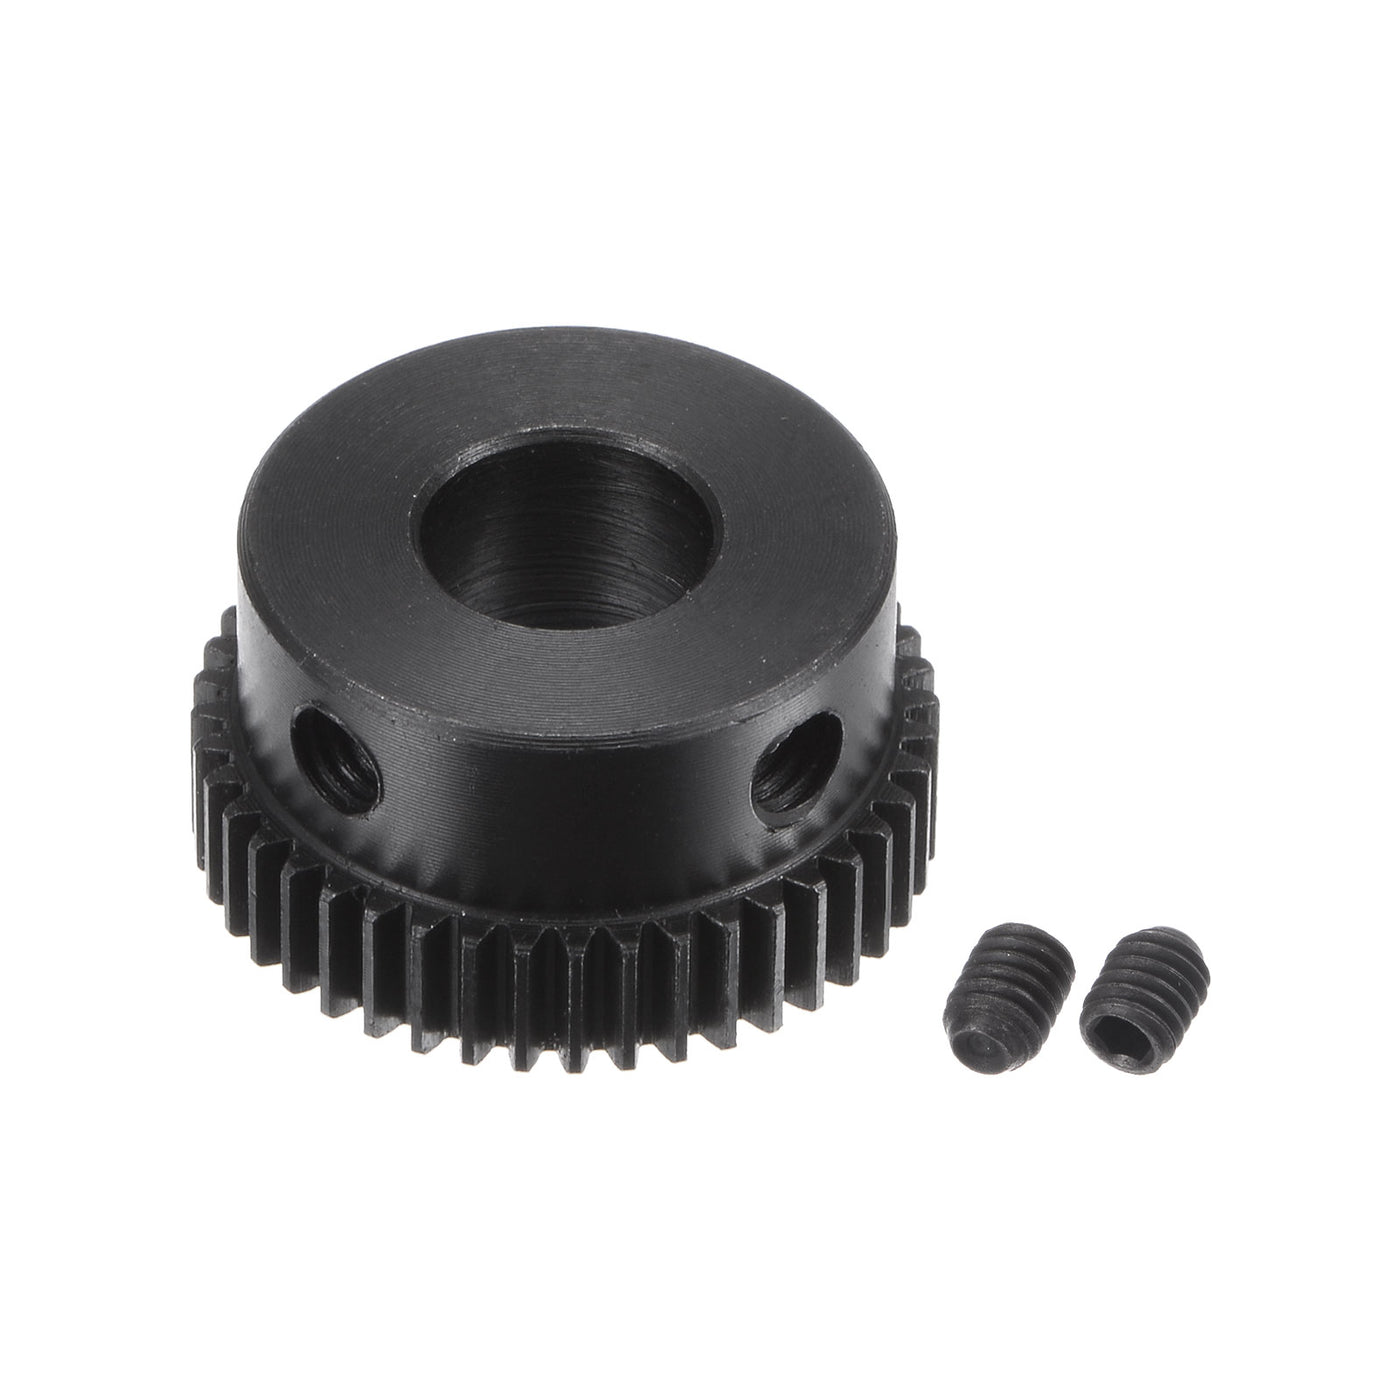 uxcell Uxcell 0.5 Mod 44T 8mm Bore 23mm Outer Dia 45# Carbon Steel Motor Pinion Gear Set